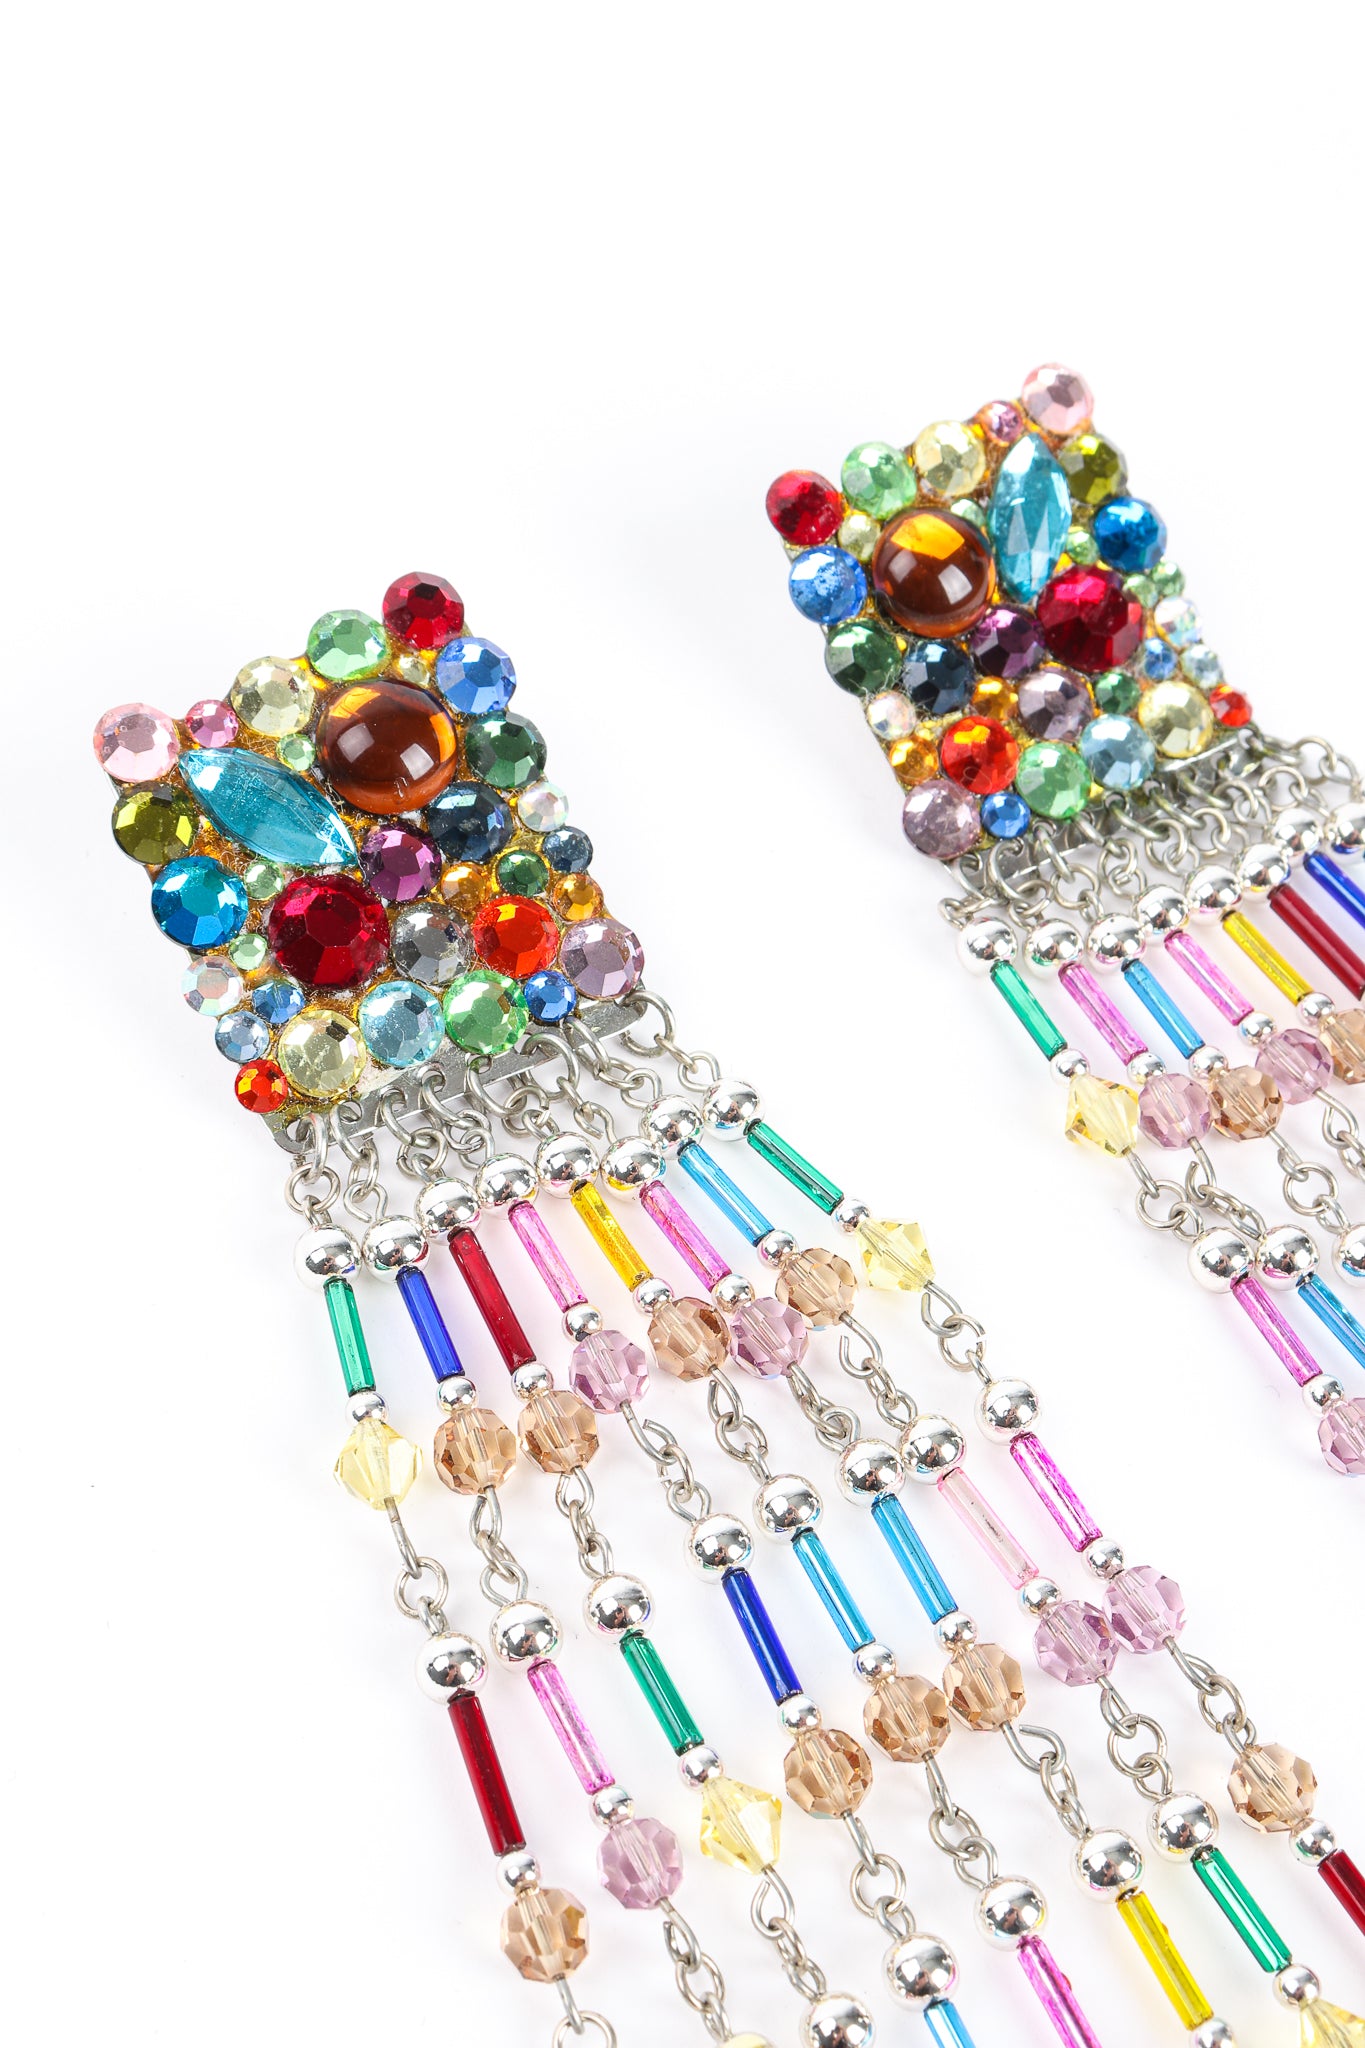 Vintage Confetti Glass Bead Fringe Earrings detail at Recess Los Angeles